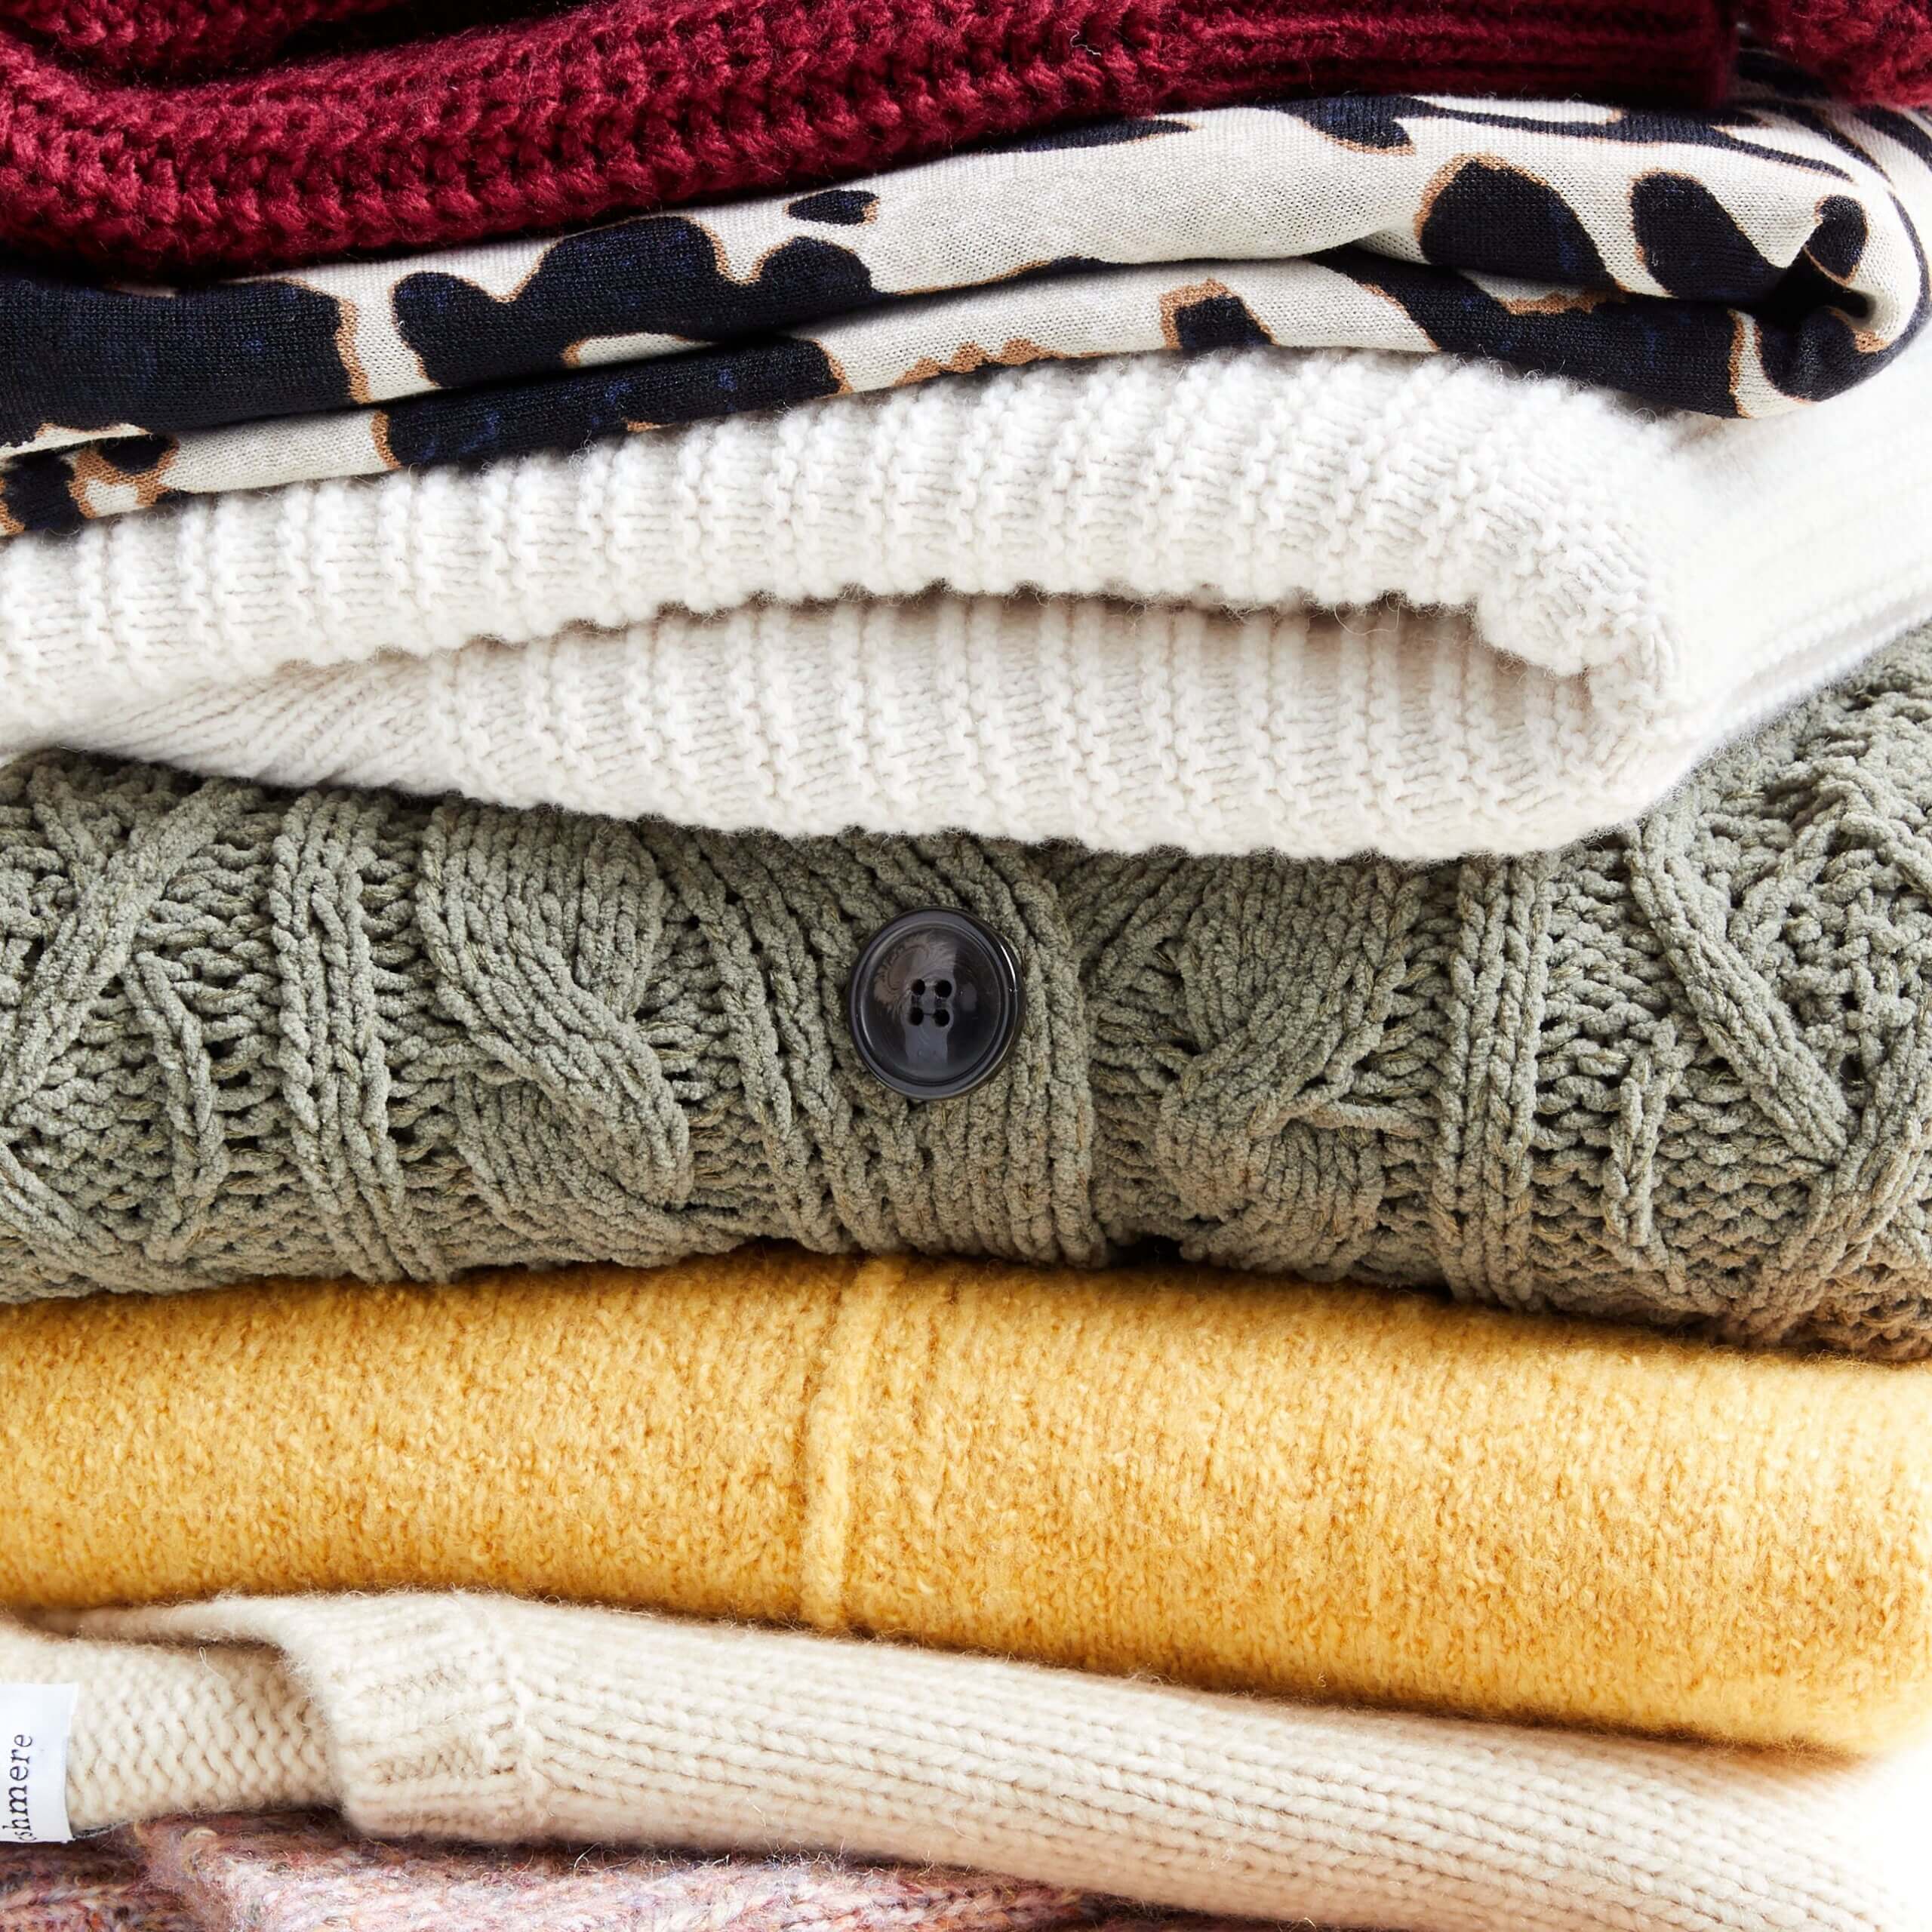 How to Clean and Care for Sweaters